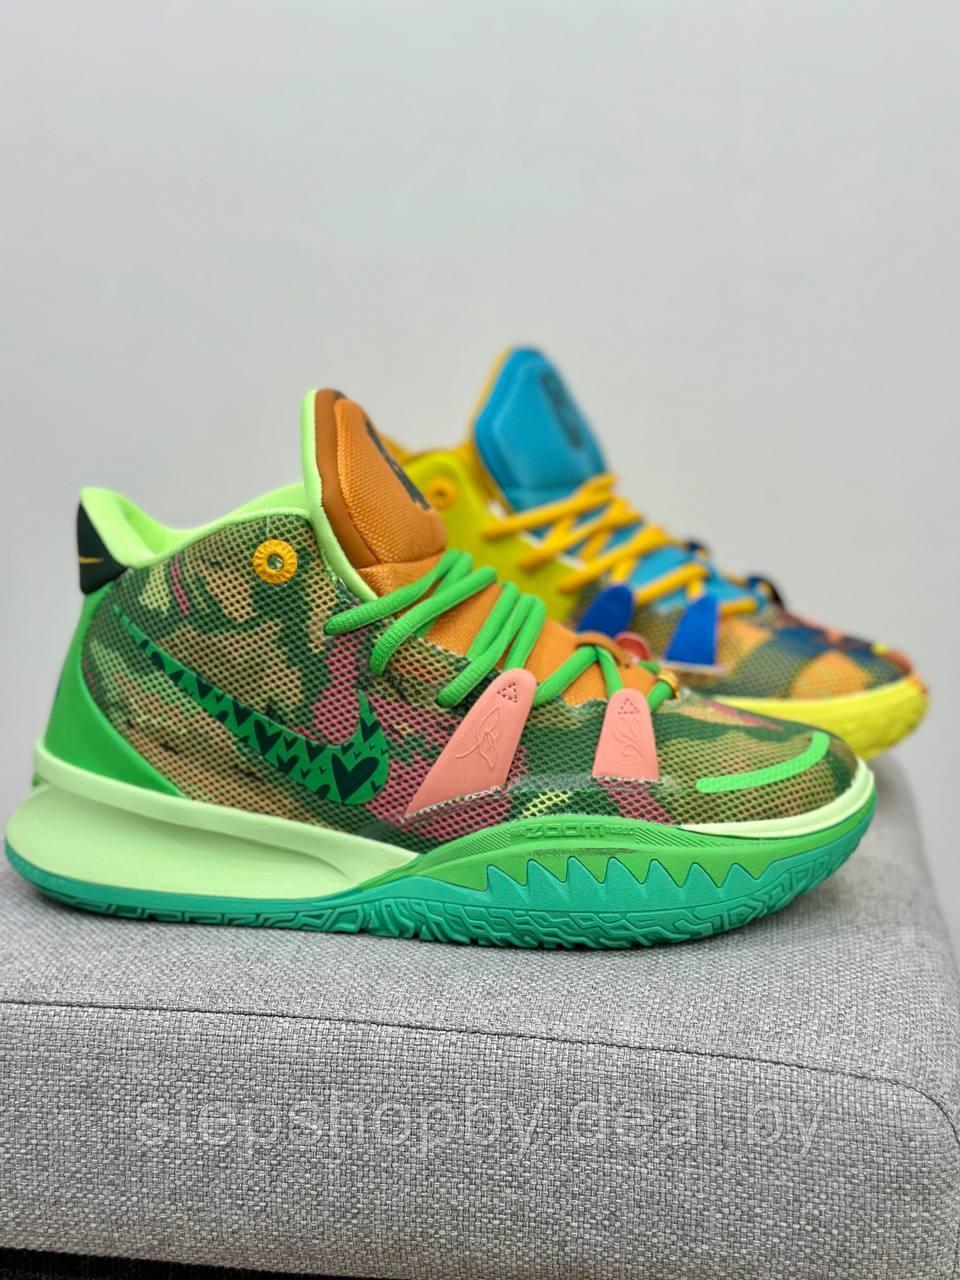 Nike Kyrie 7 Sneaker Room Air and Earth - фото 2 - id-p220481715